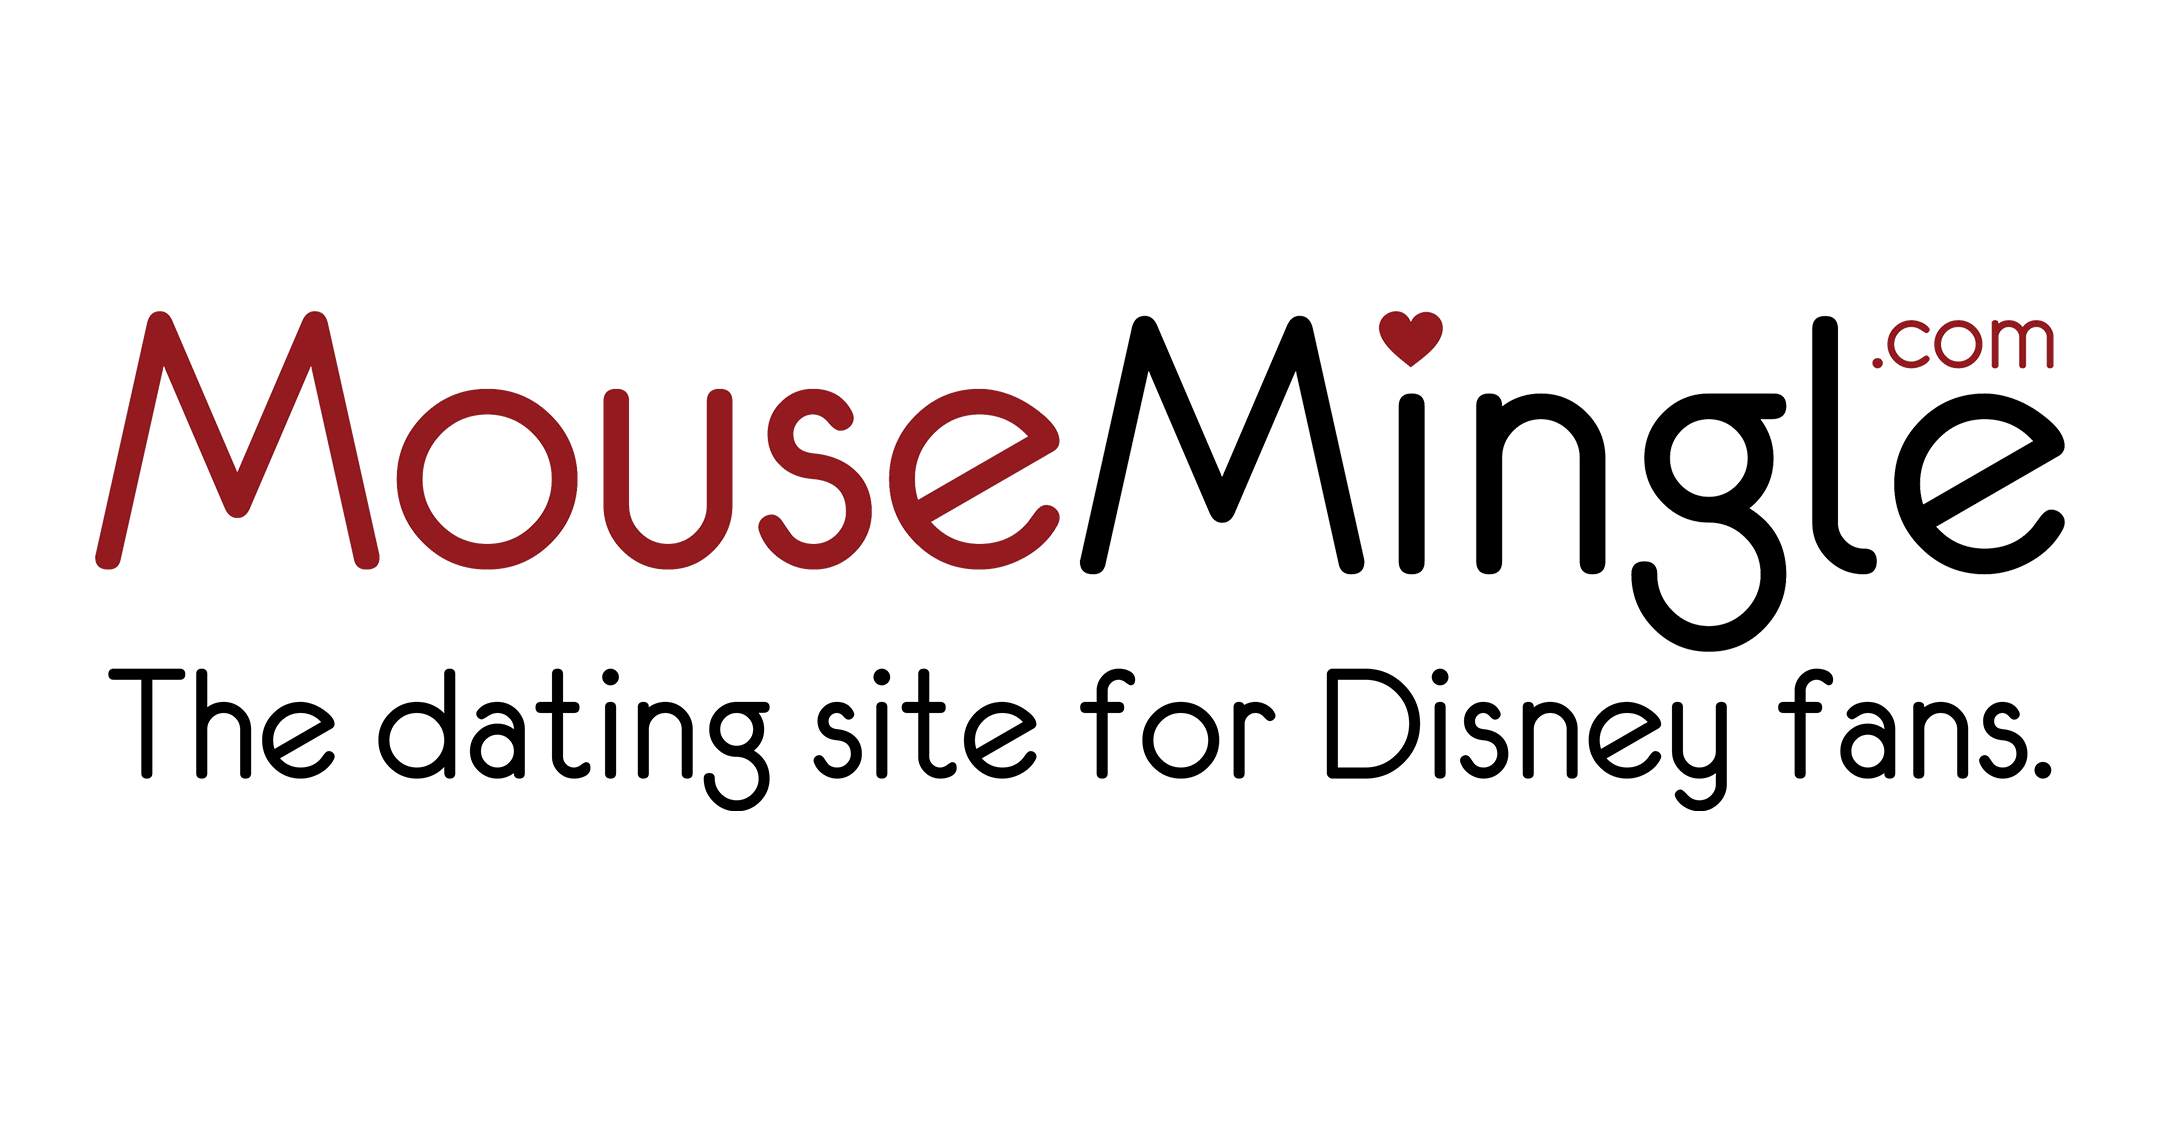 Yeah, the Dating Site for Disney Fans “Is a thing”